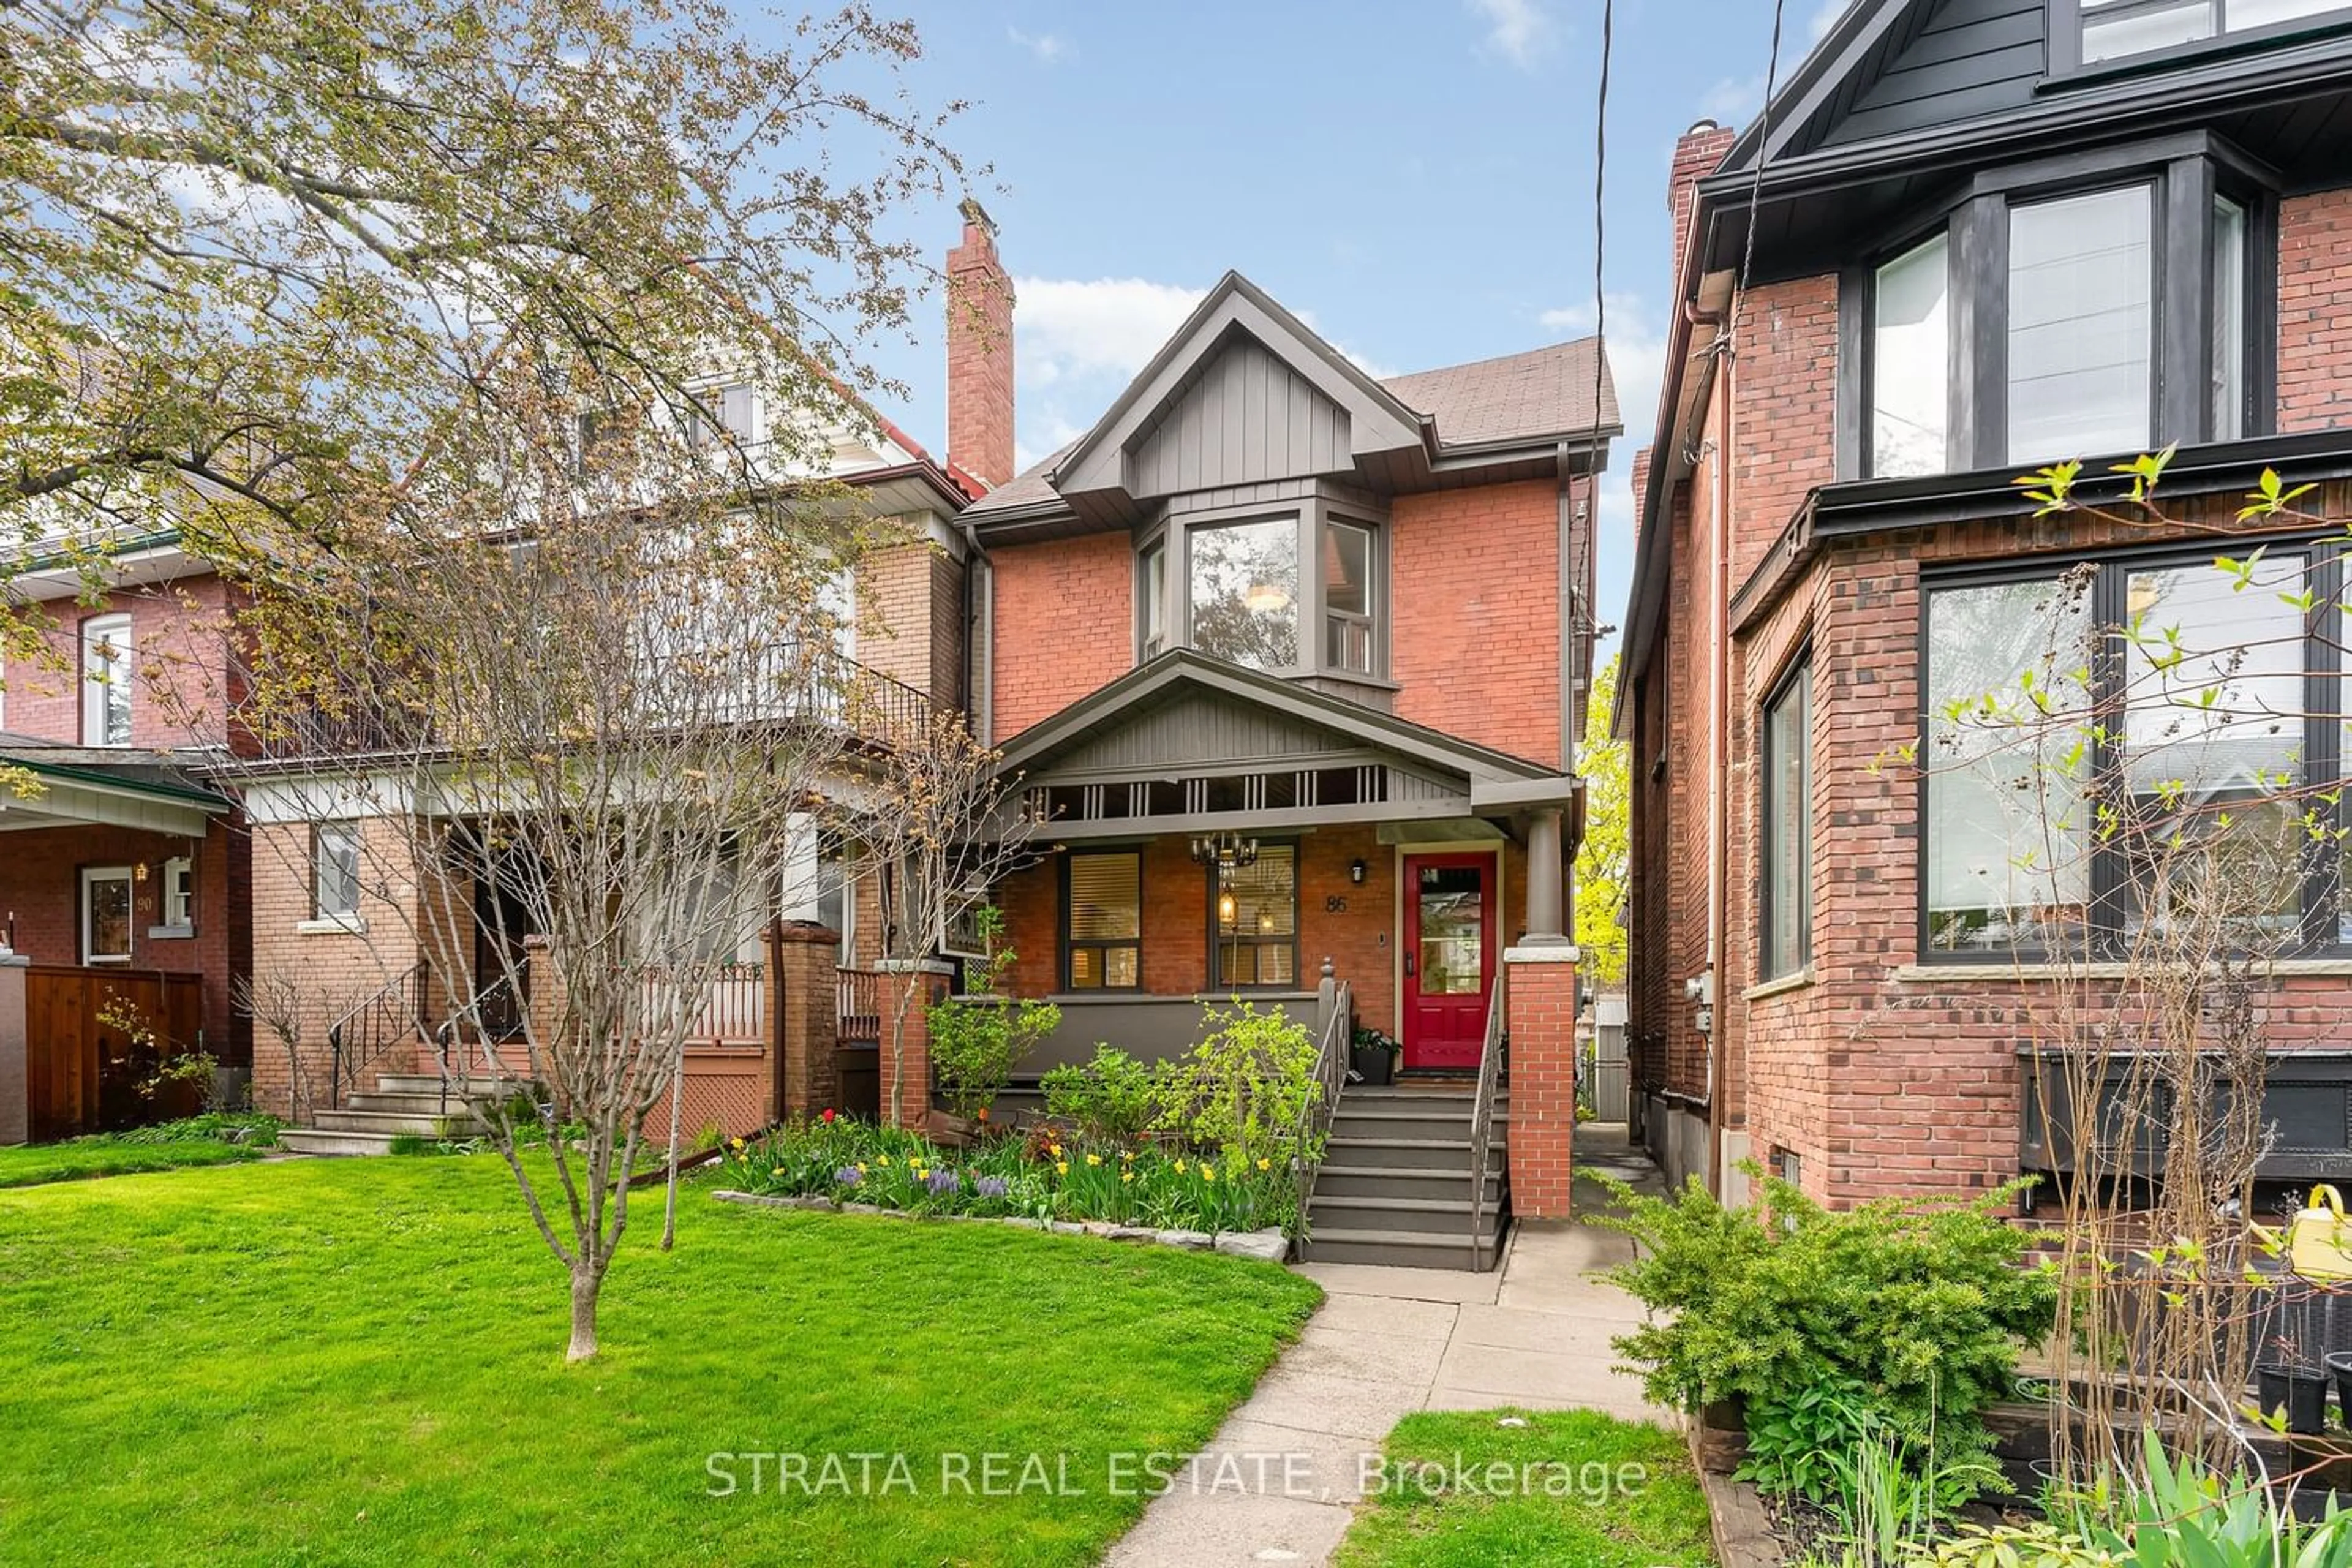 Home with brick exterior material for 86 Geoffrey St, Toronto Ontario M6R 1P3